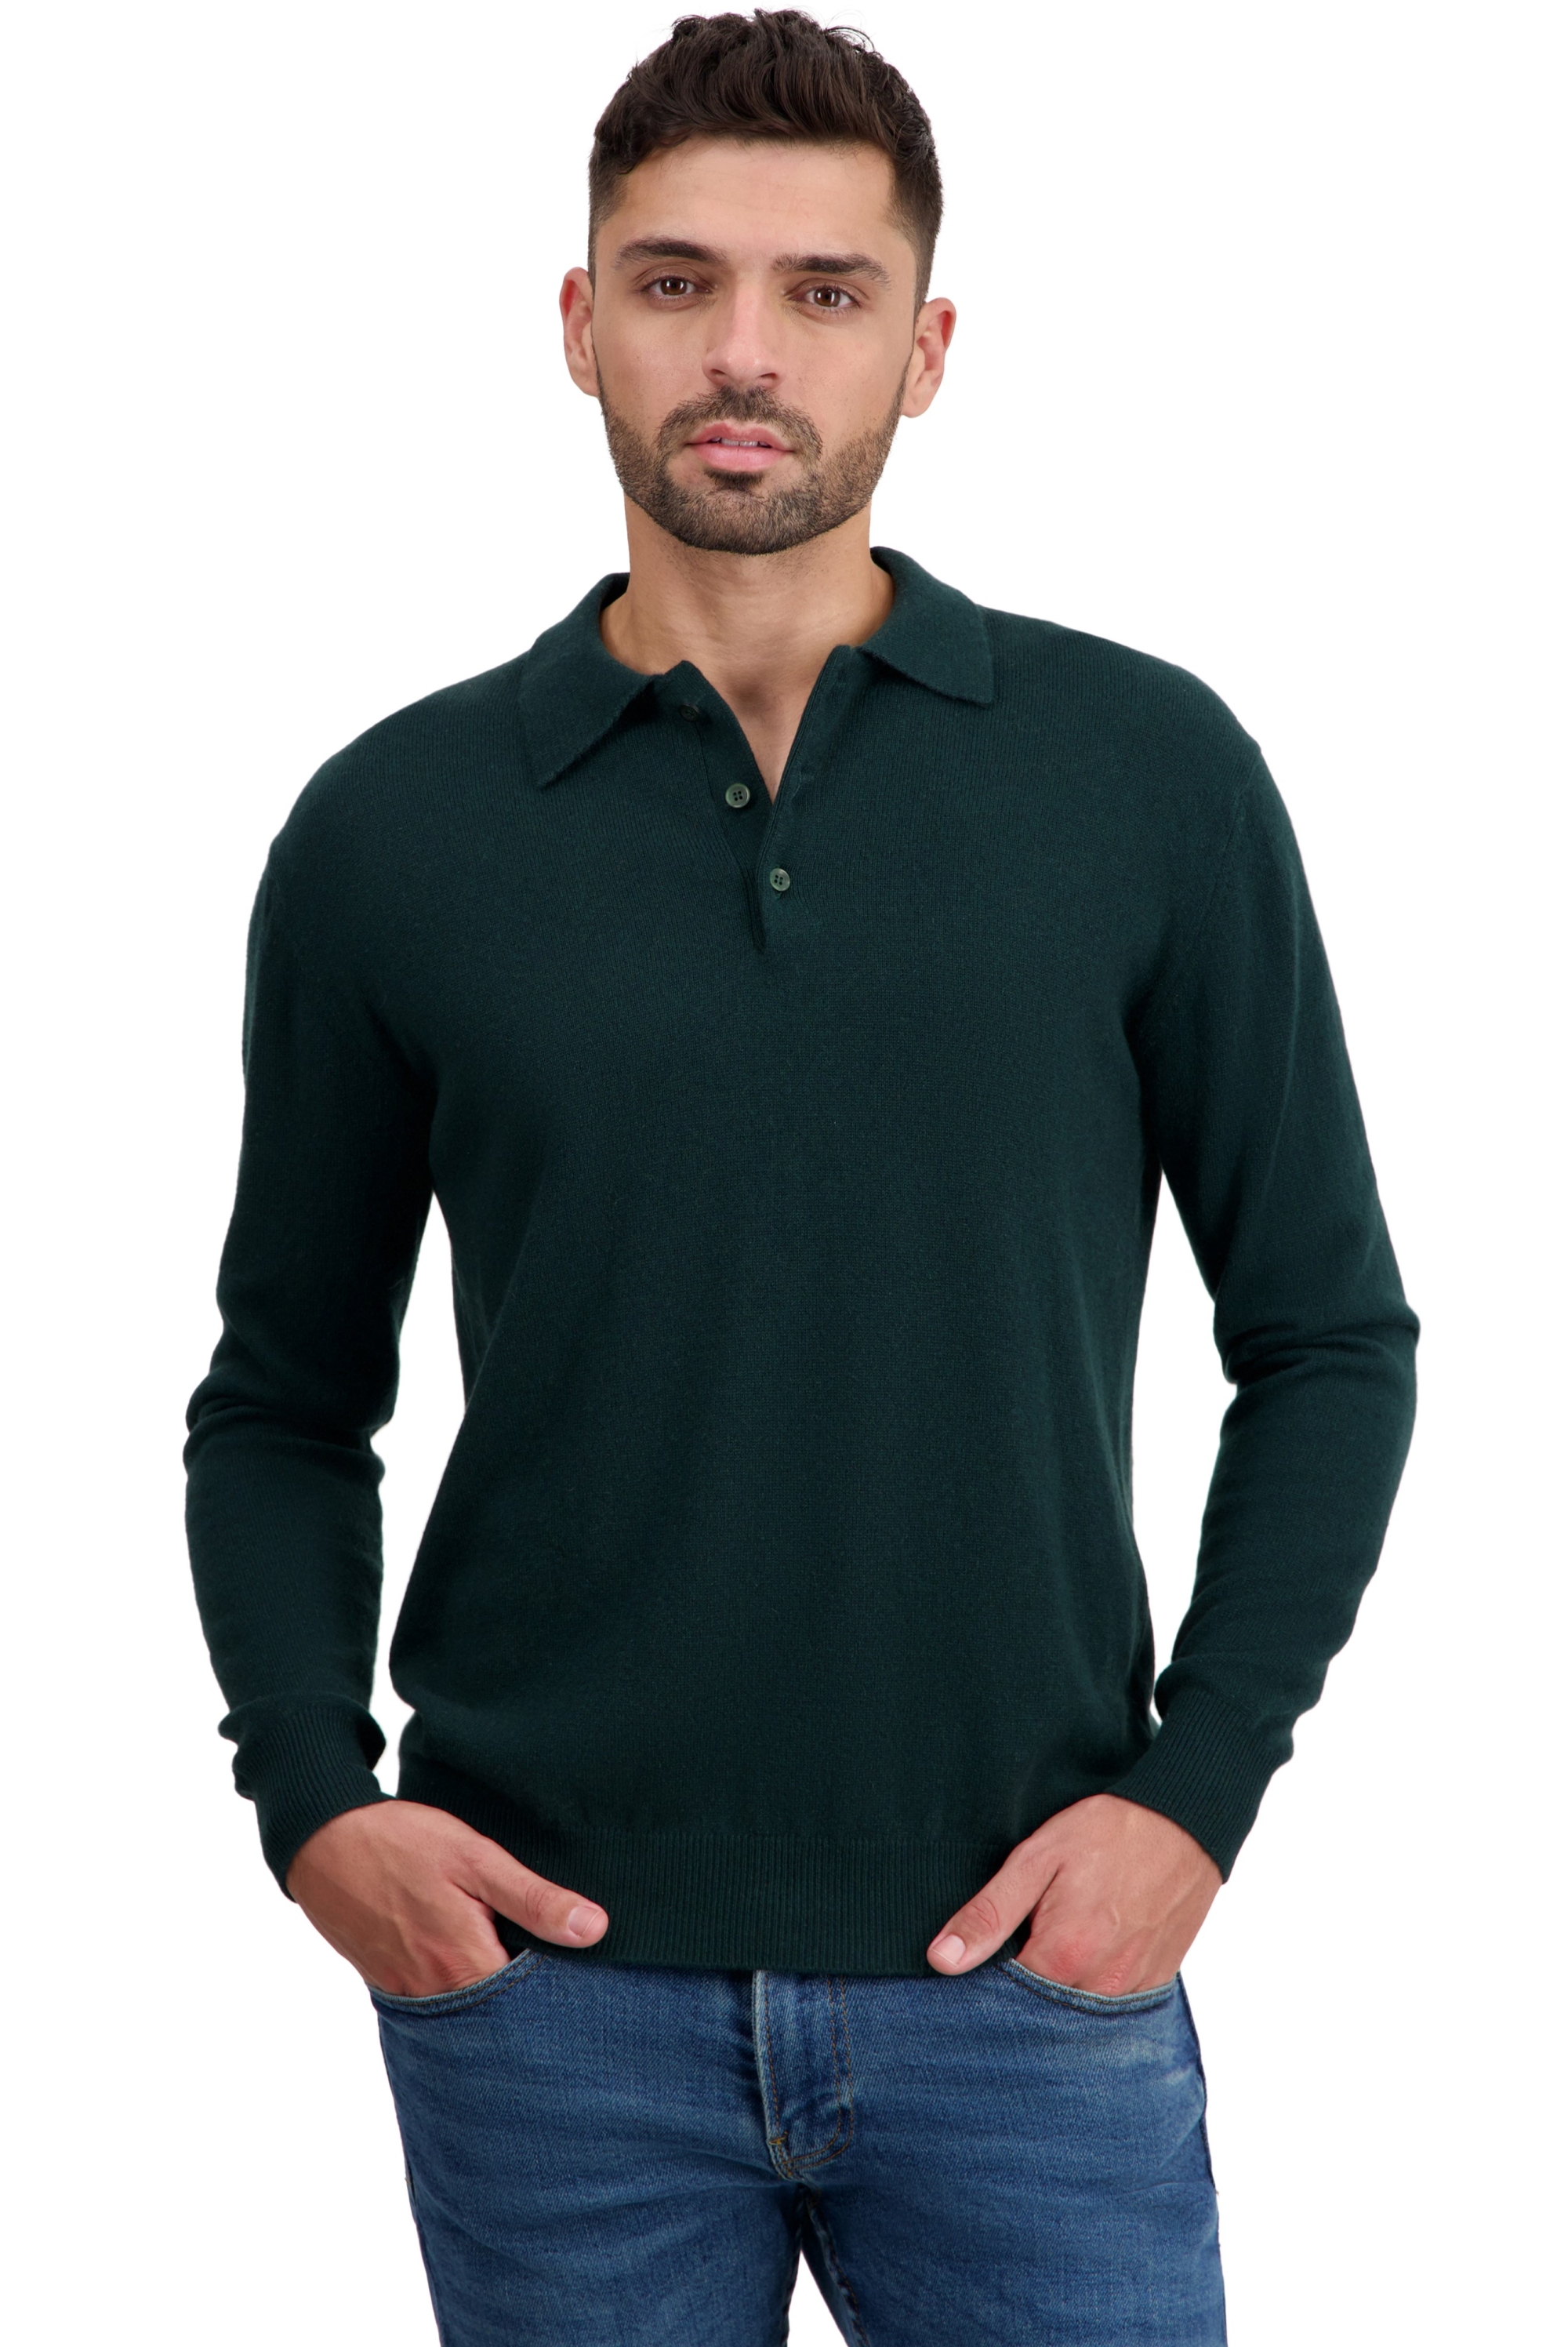 Cashmere uomo polo tarn first bottle l